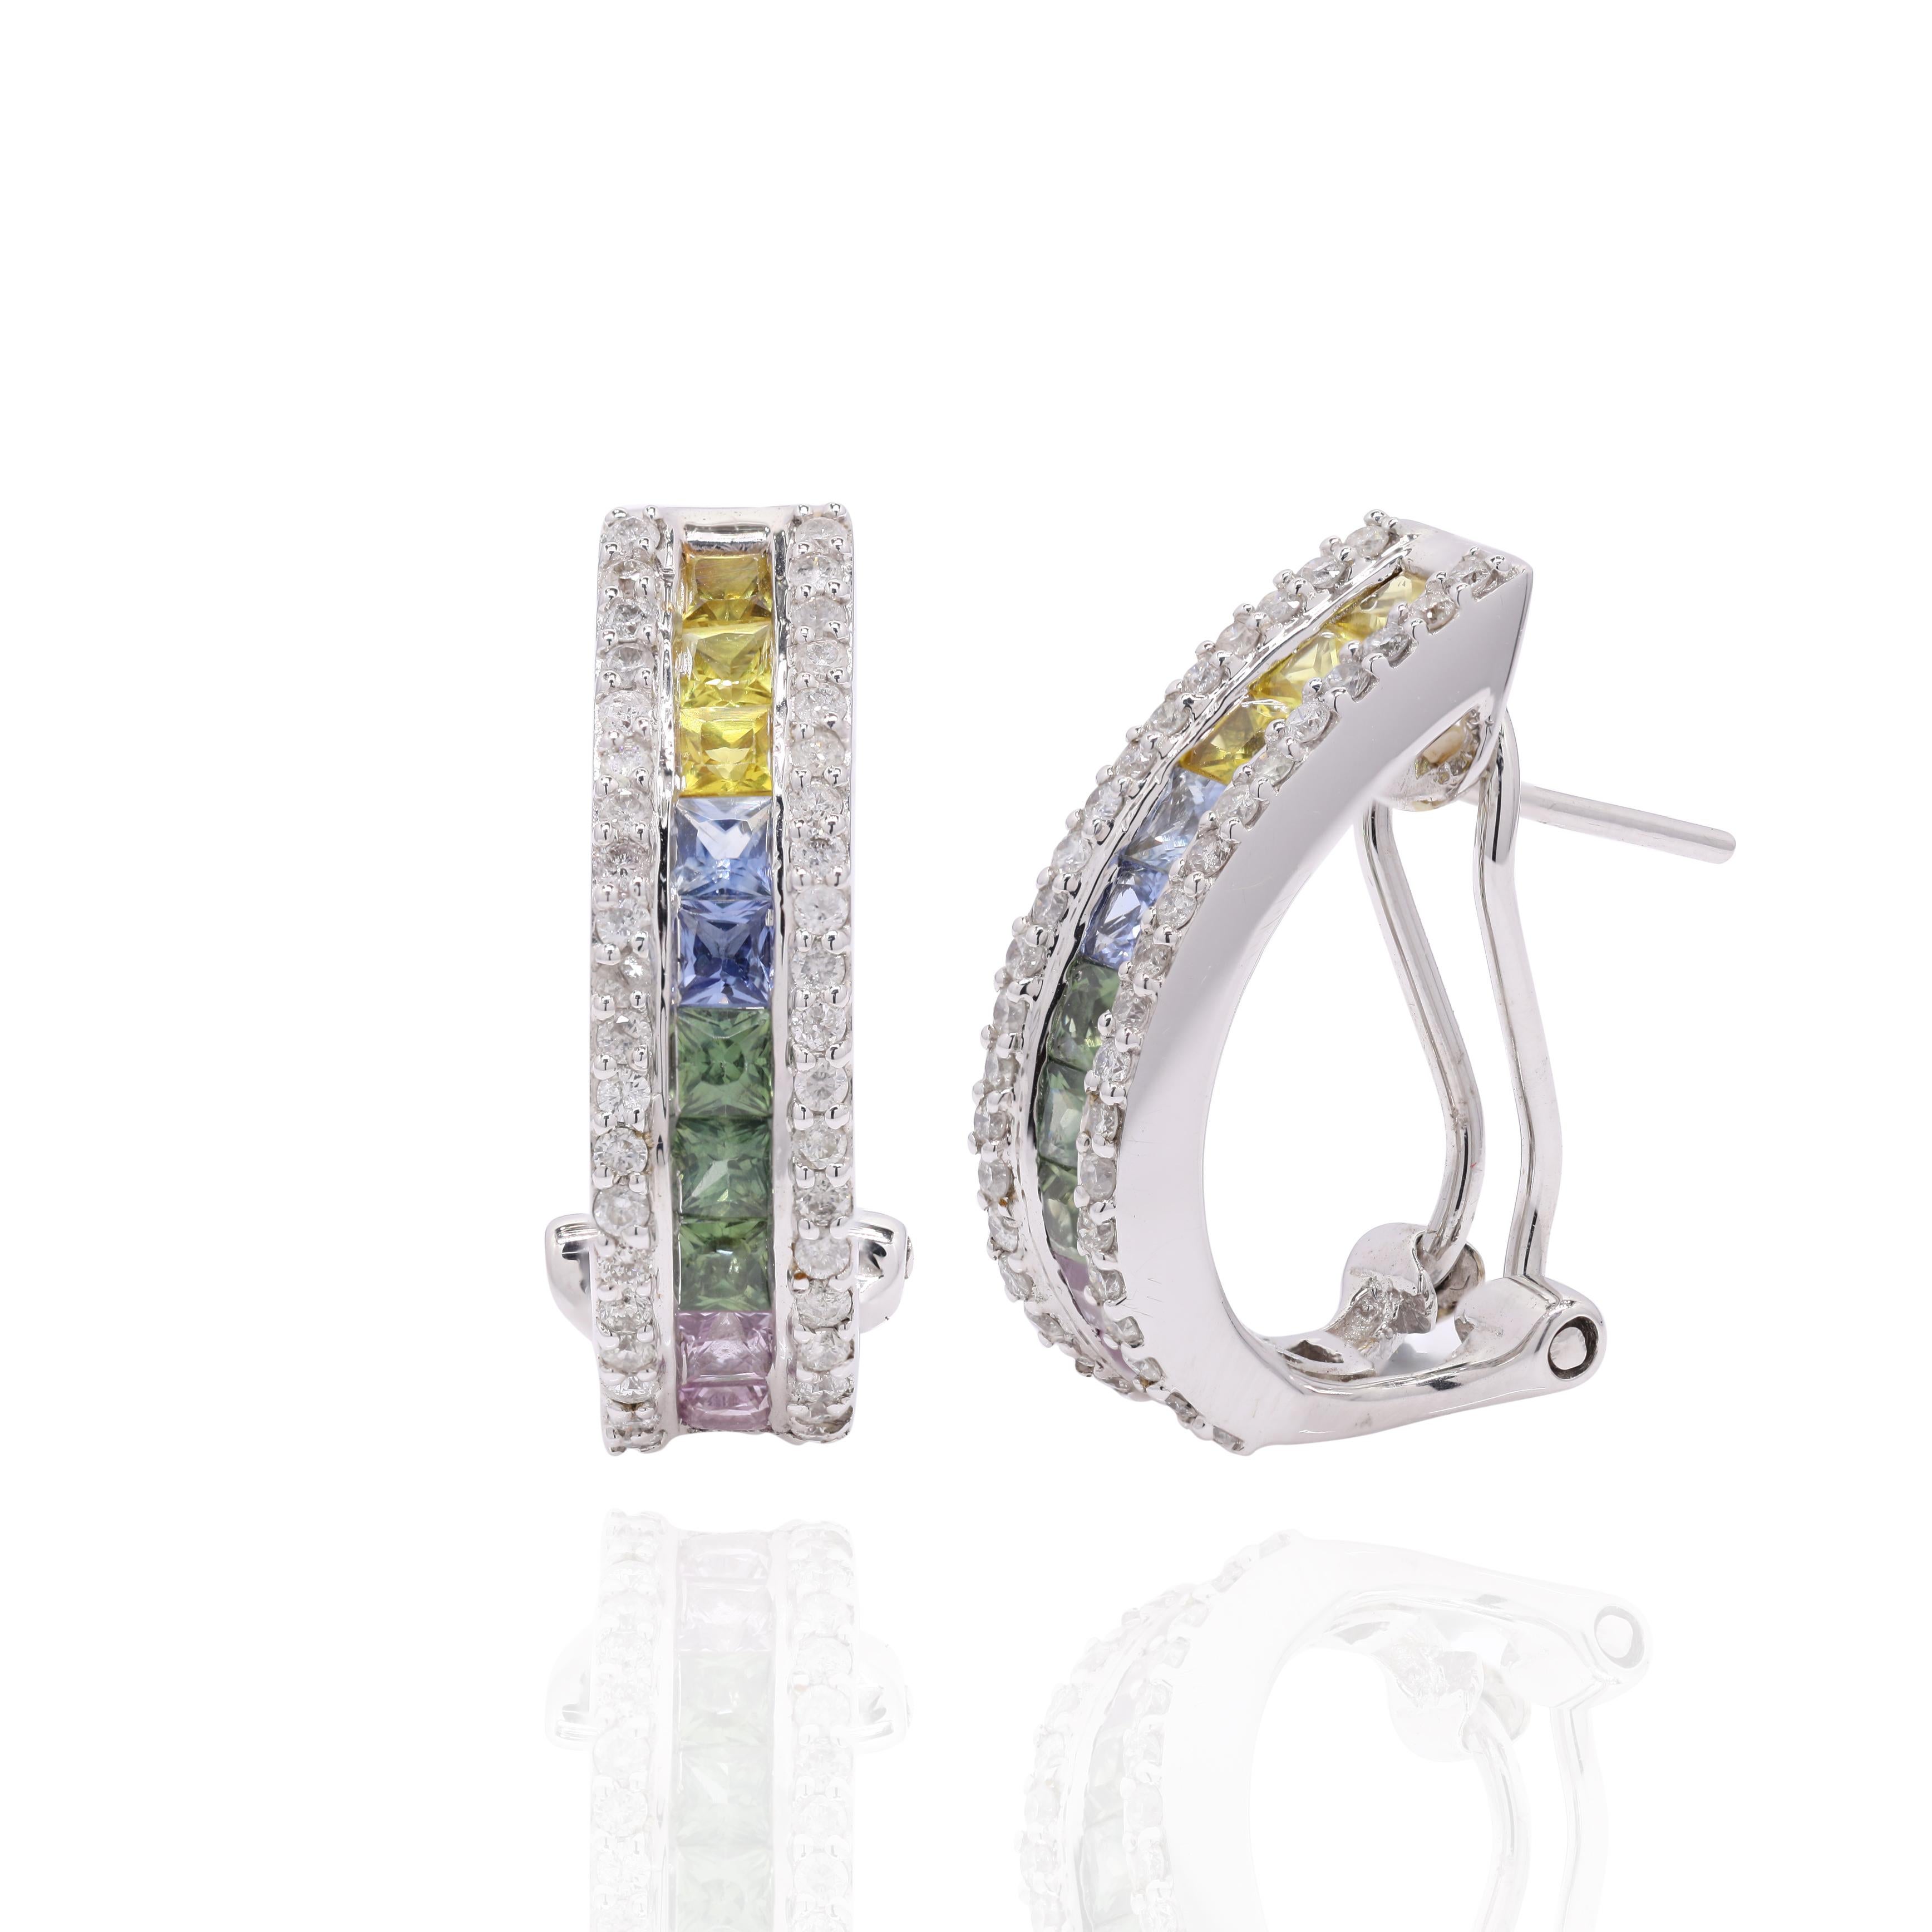 Diamond and Multi Colored Sapphire Clip On Earrings in 18K Gold. Earrings create a subtle beauty while showcasing the colors of the natural precious gemstones and illuminating diamonds making a statement.
Square cut multi sapphire studs with